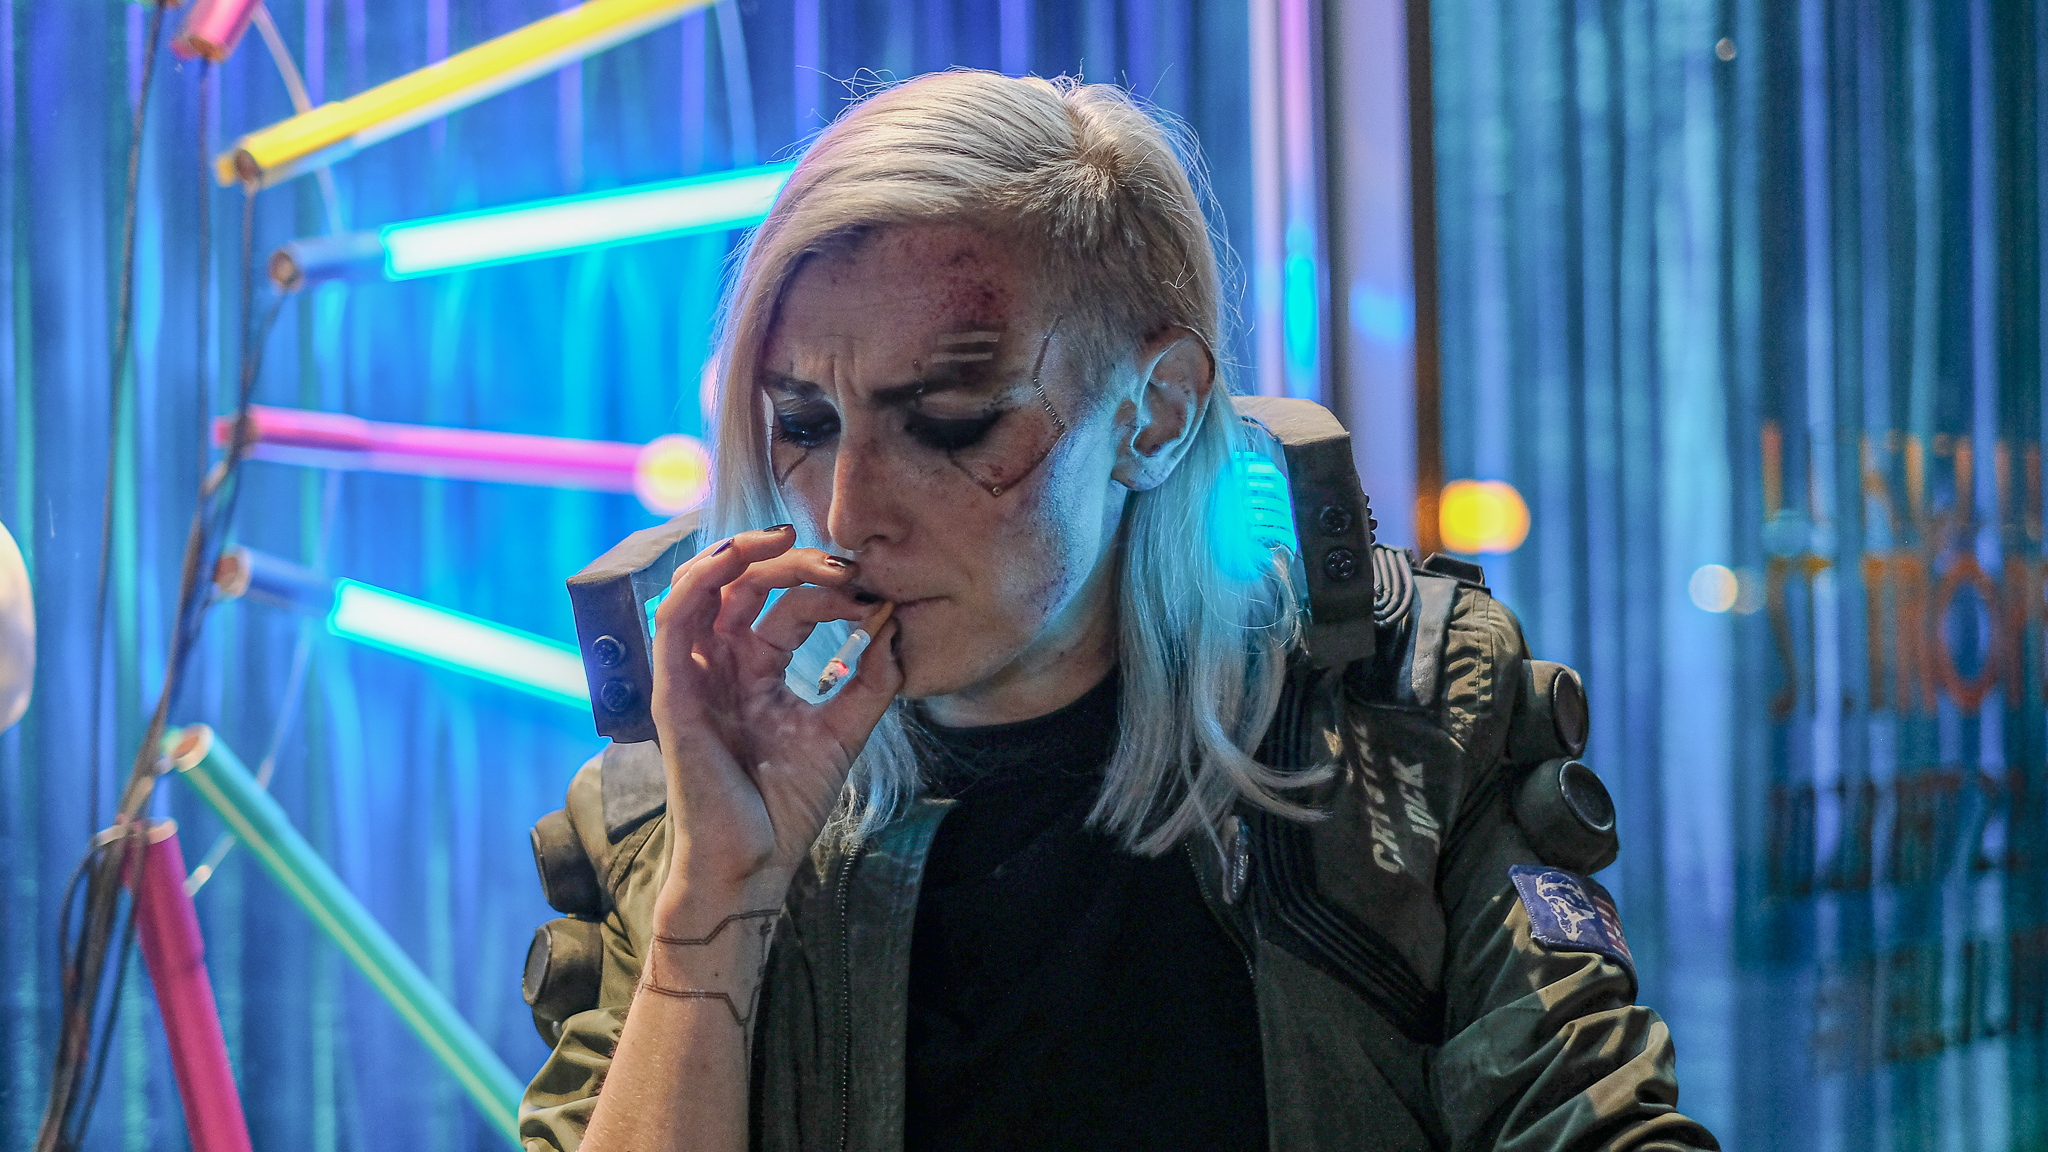 Cyberpunk 2077 - V Cosplay - Smoking a cigarette and looking down